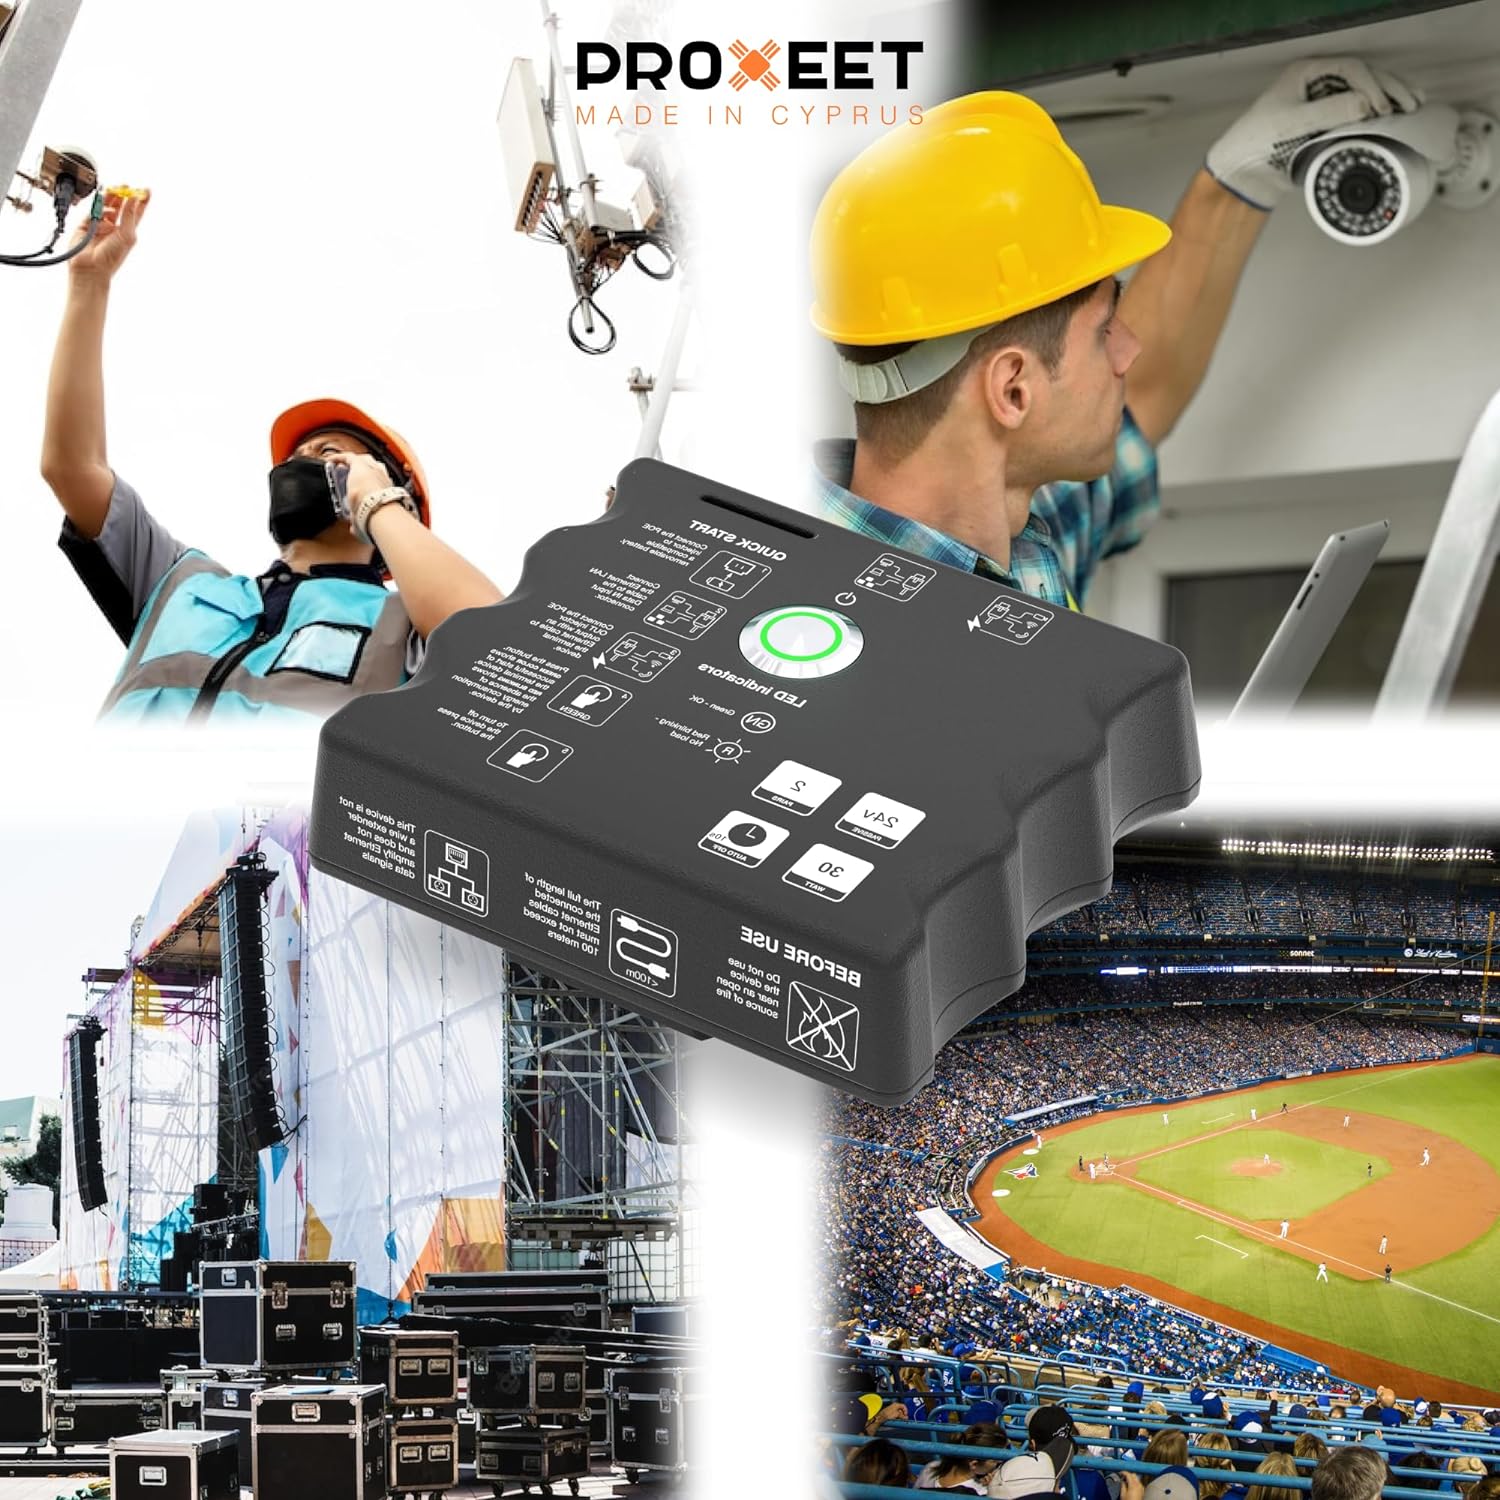 Versatile Deployment: PROXEET ET-1C Portable PoE Injector in Action at Work and Events